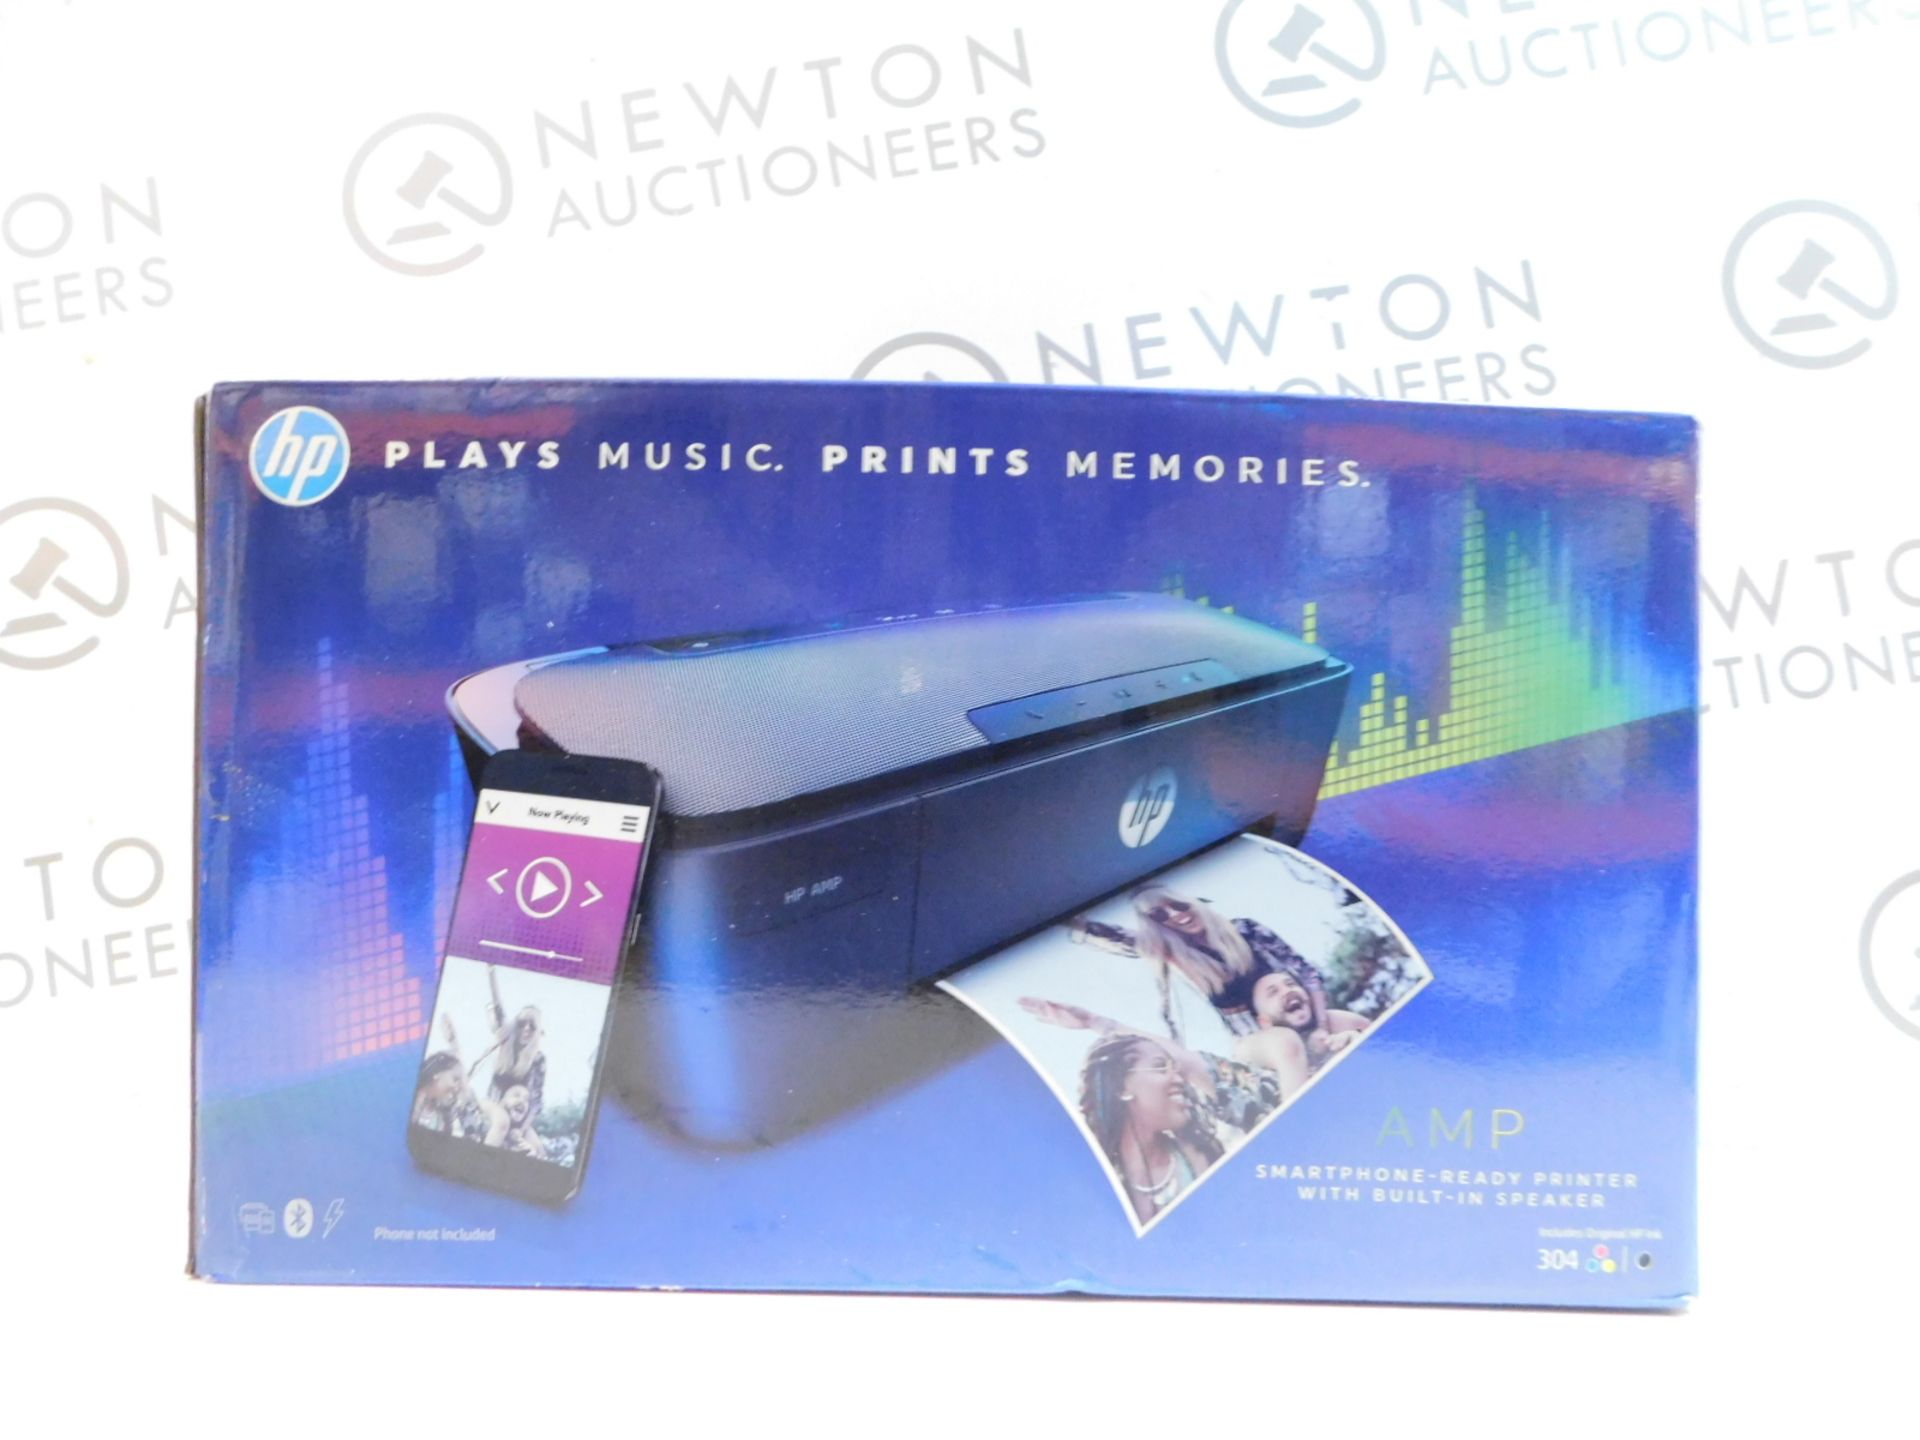 1 BOXED HP AMP 130 THREE-IN-ONE INKJET PRINTER WITH BLUETOOTH SPEAKER RRP Â£129.99